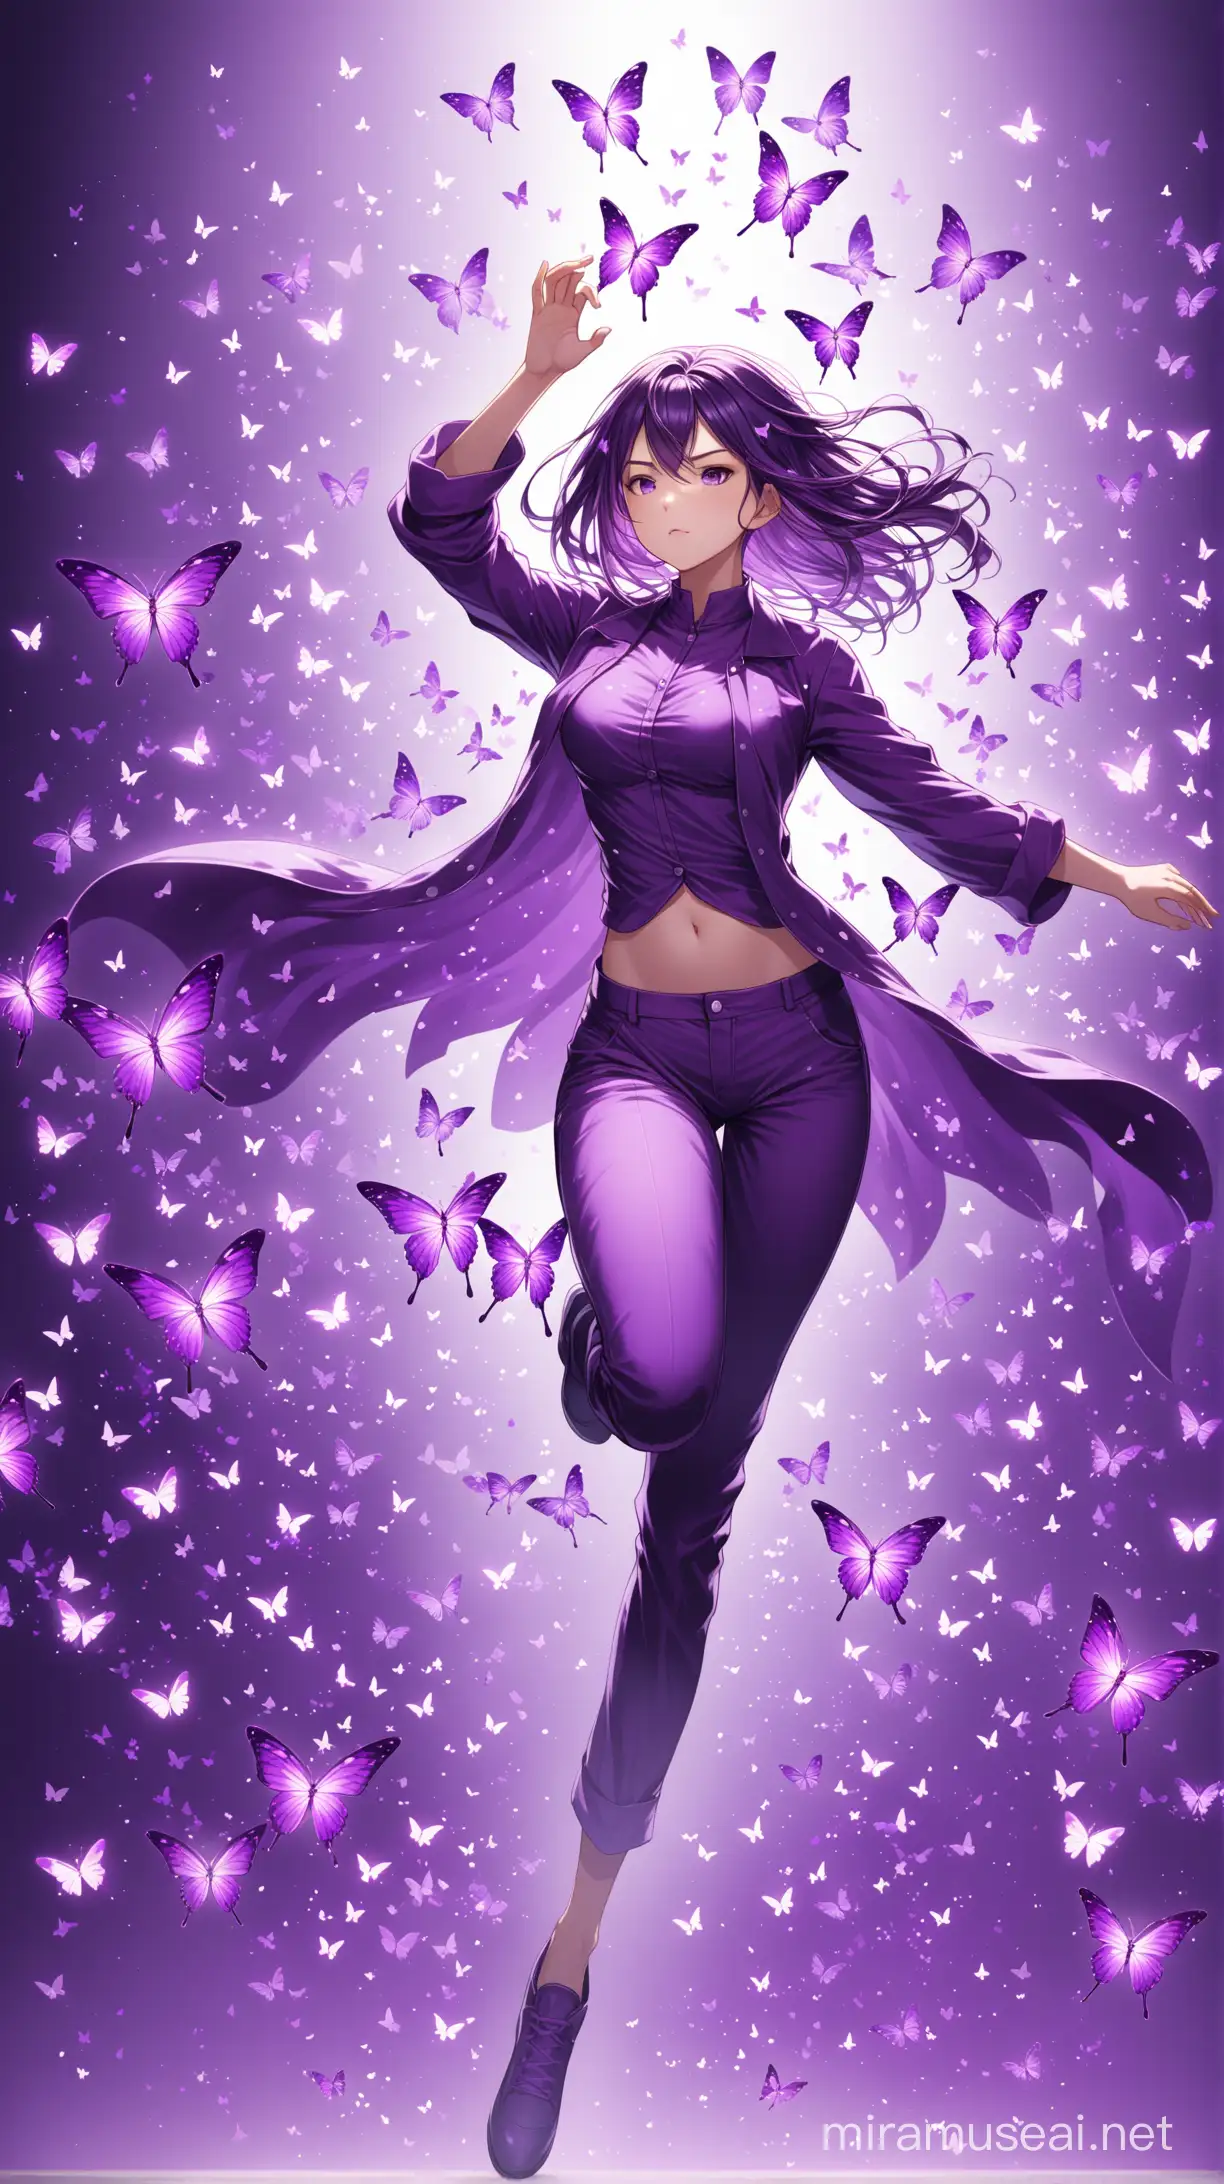 girl whose body made of purple butterflies, in an action pose. Wearing  pants with a purple theme